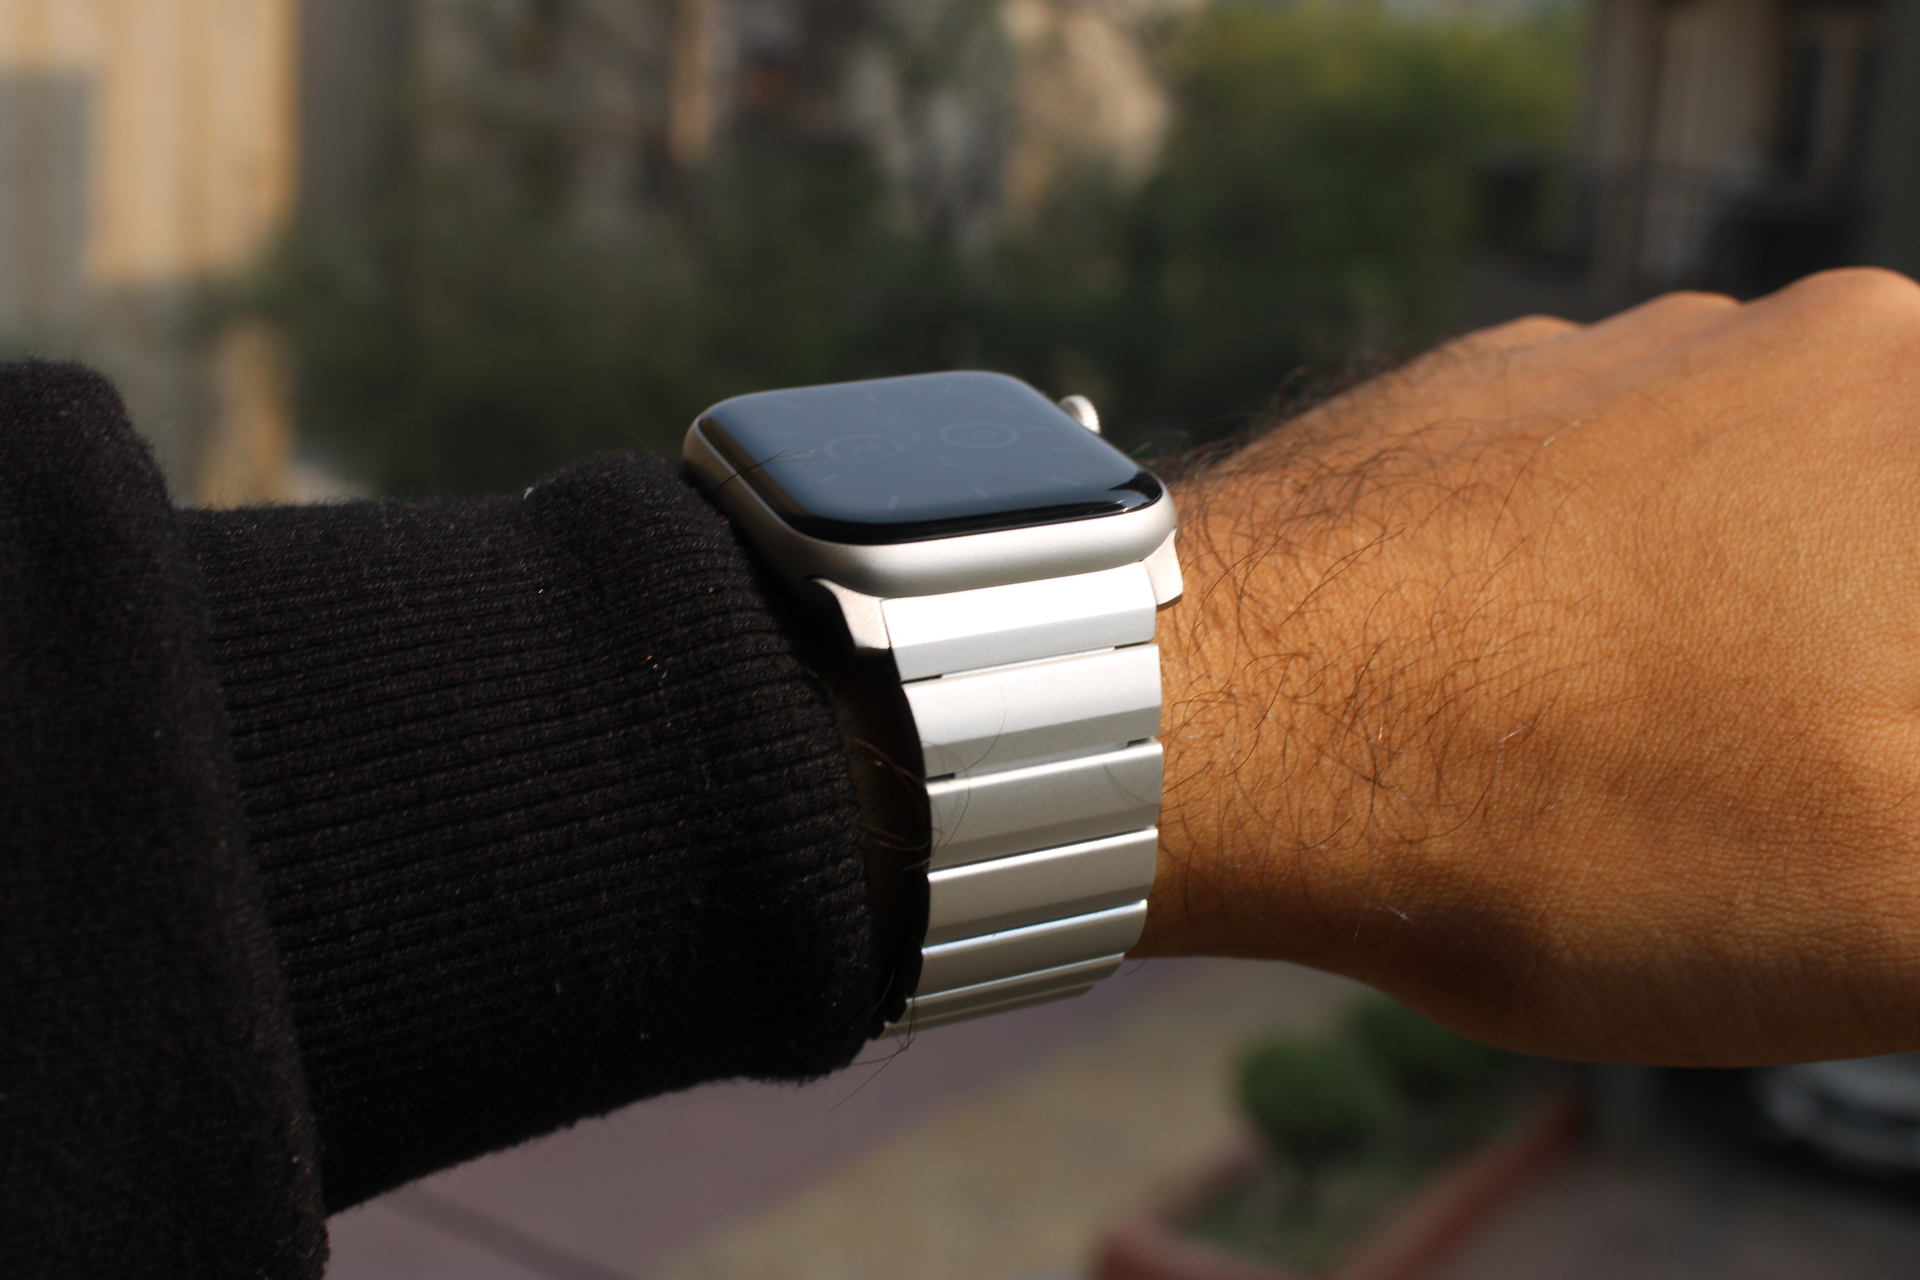 Nomad Aluminum Band review: my Apple Watch has never looked better